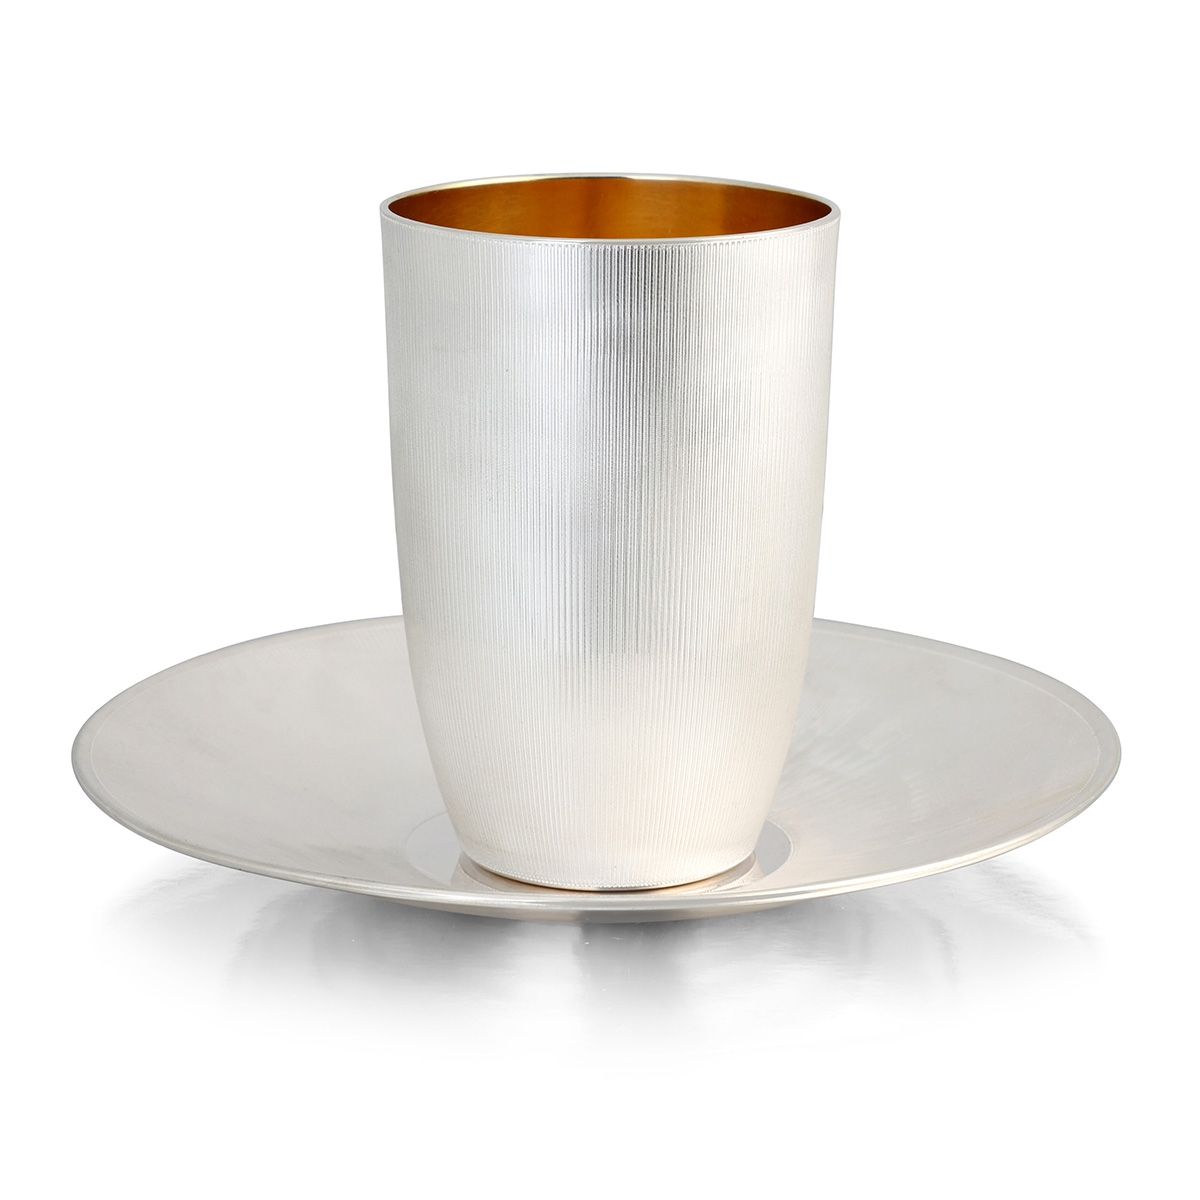 Sterling Silver Kiddush Cup and Saucer with Gentle Ribbed Design - 1